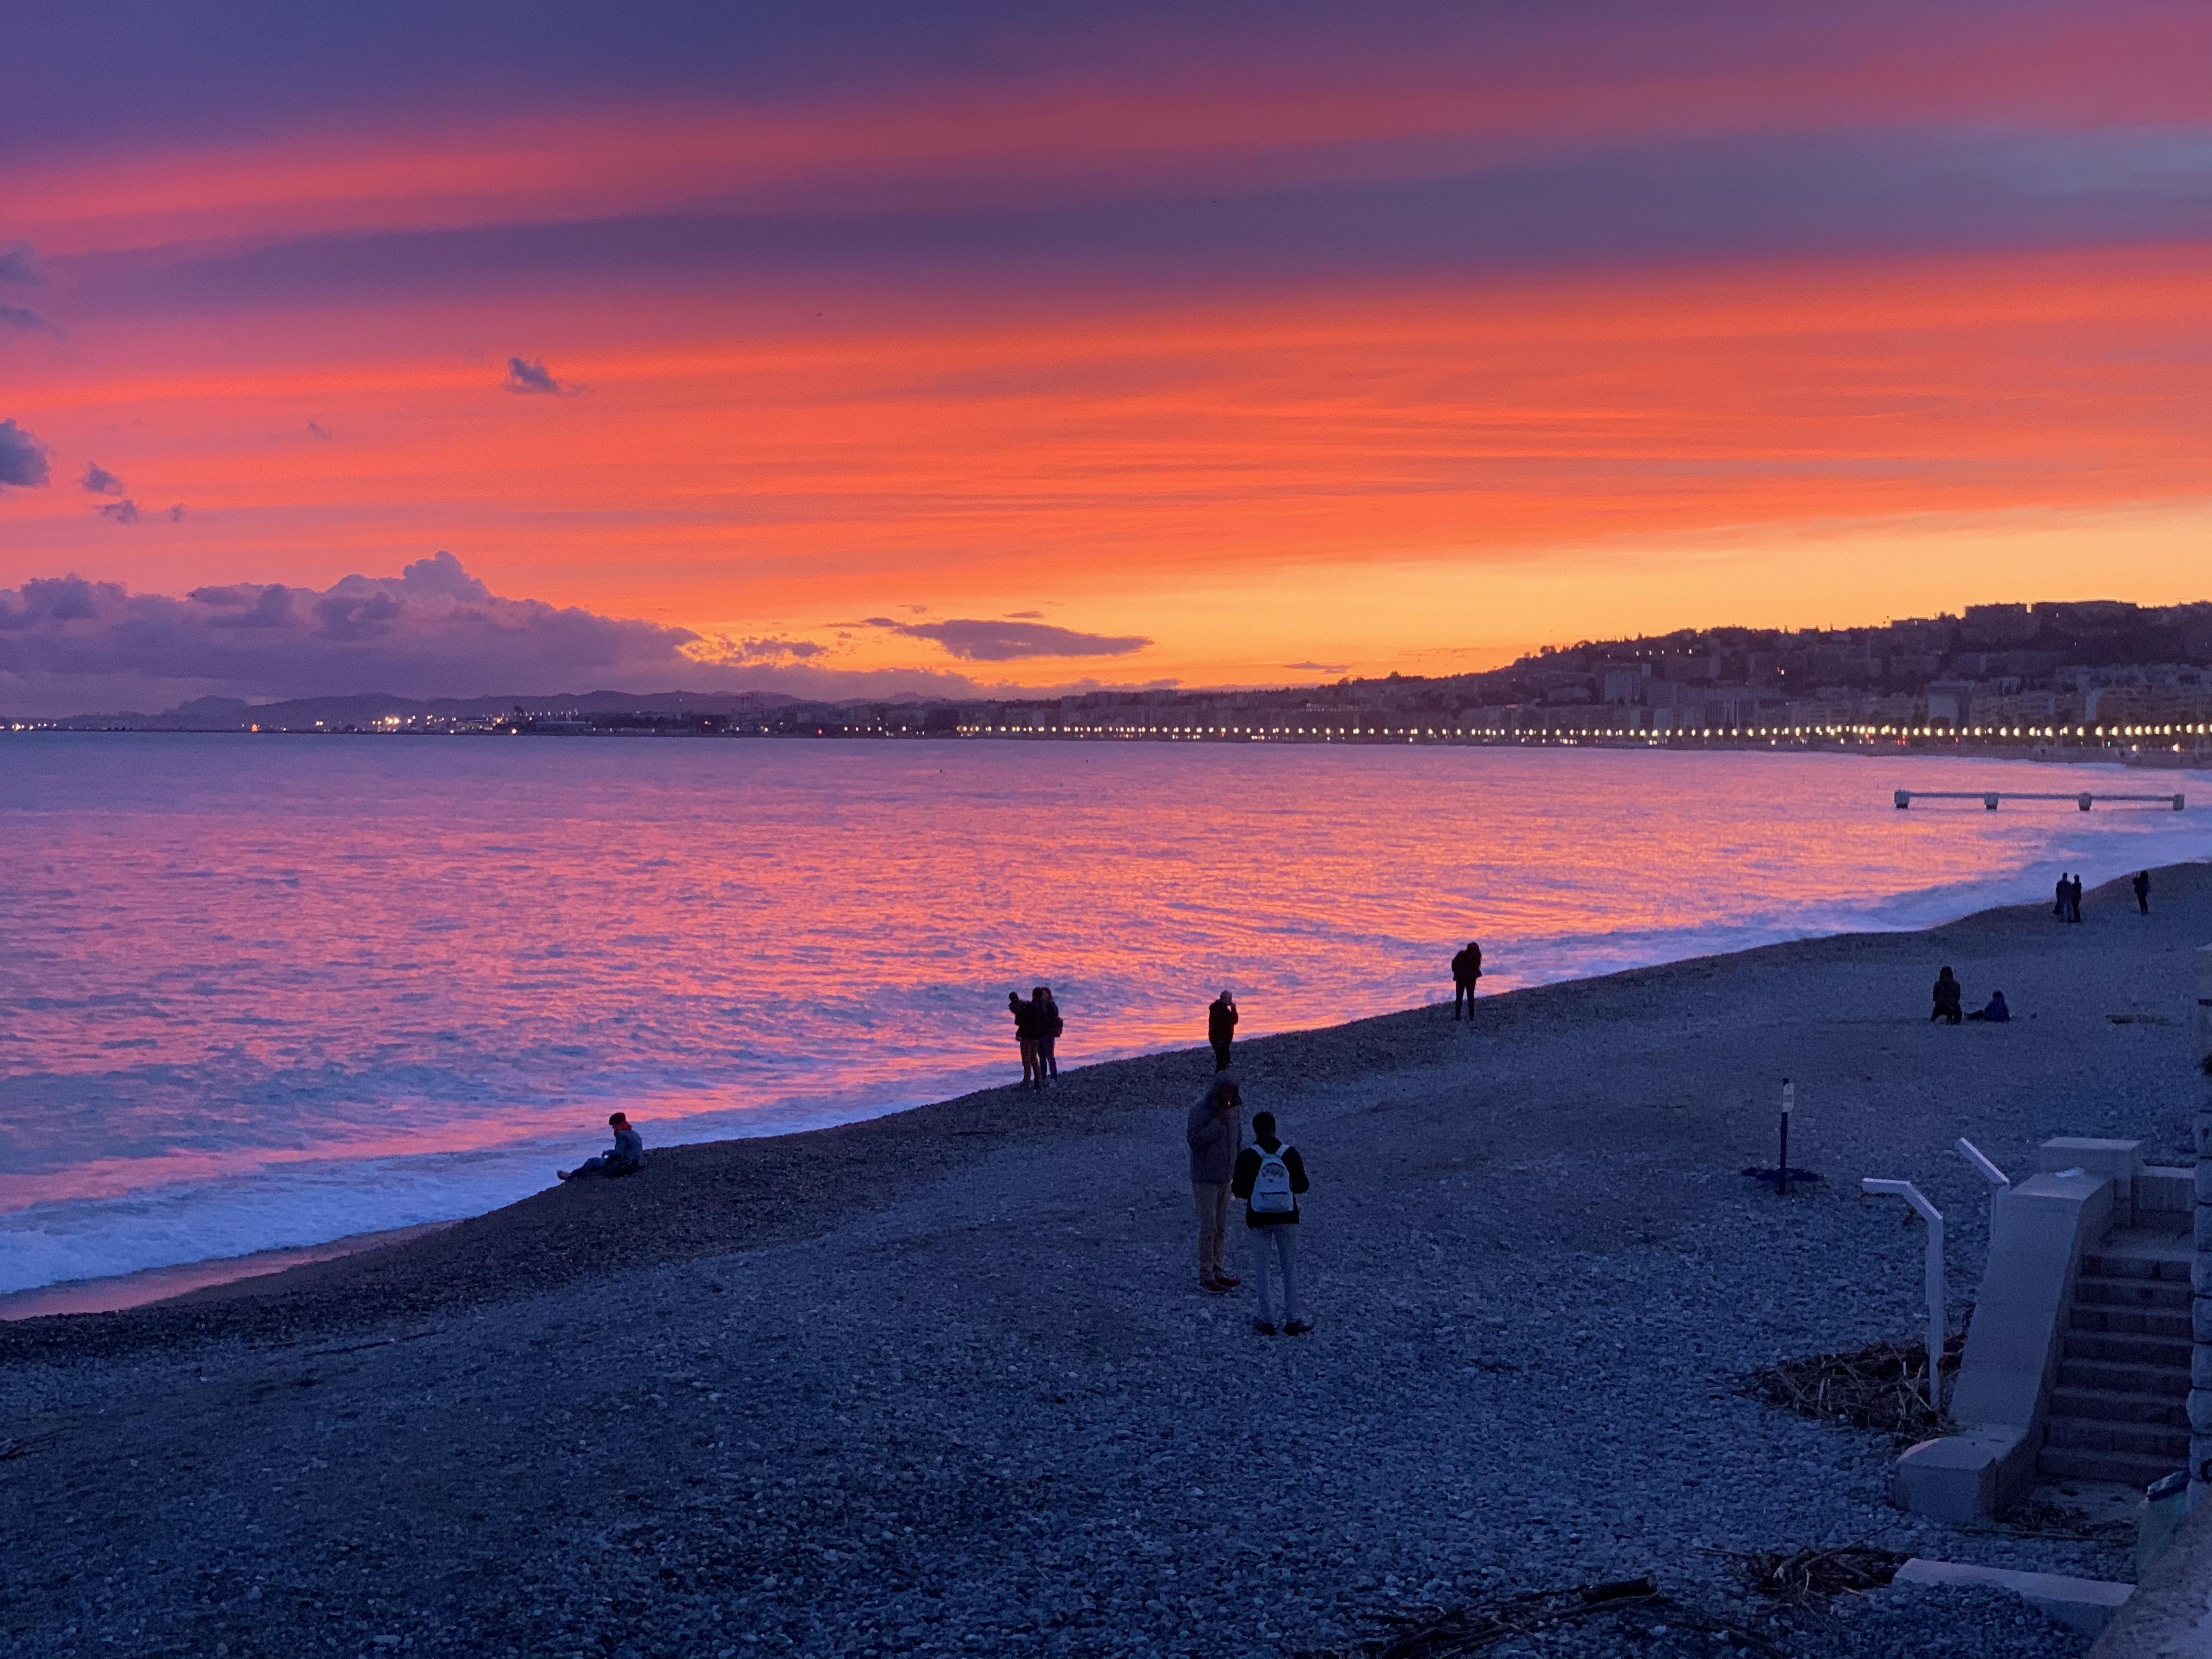 The best 5 spots in Nice for sunsets